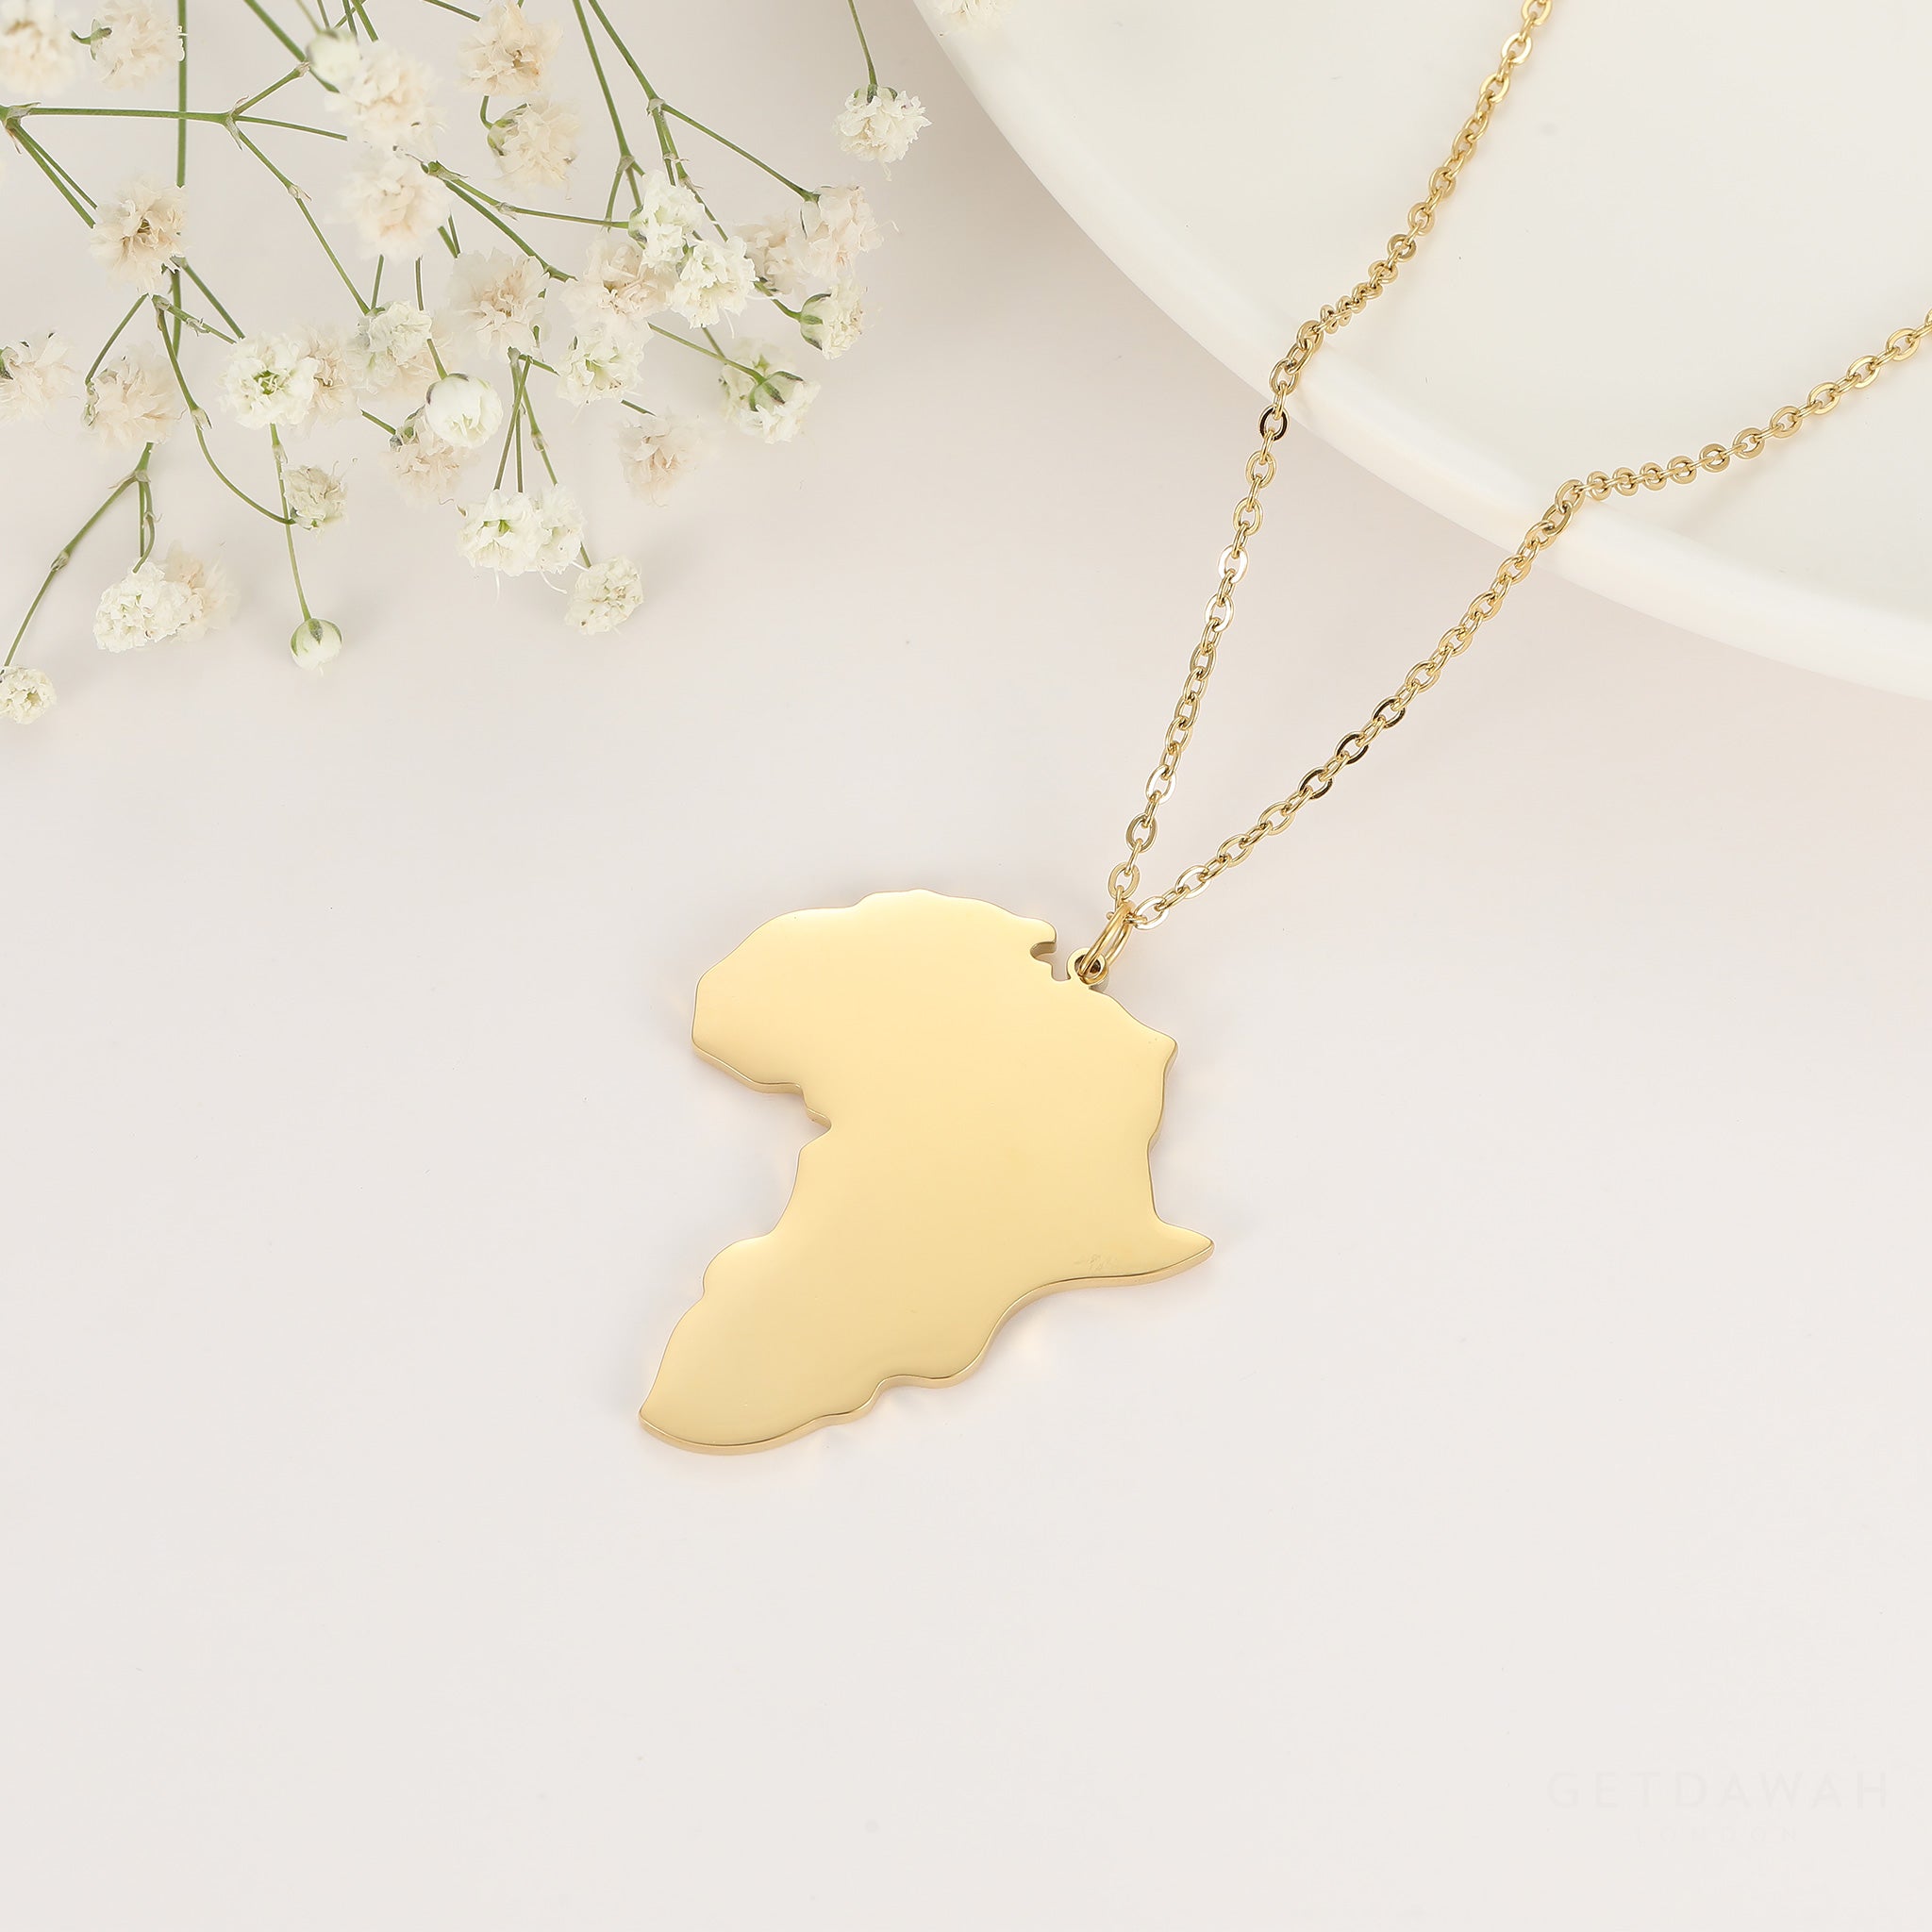 Country Map Necklace | Country Necklace | Getdawah